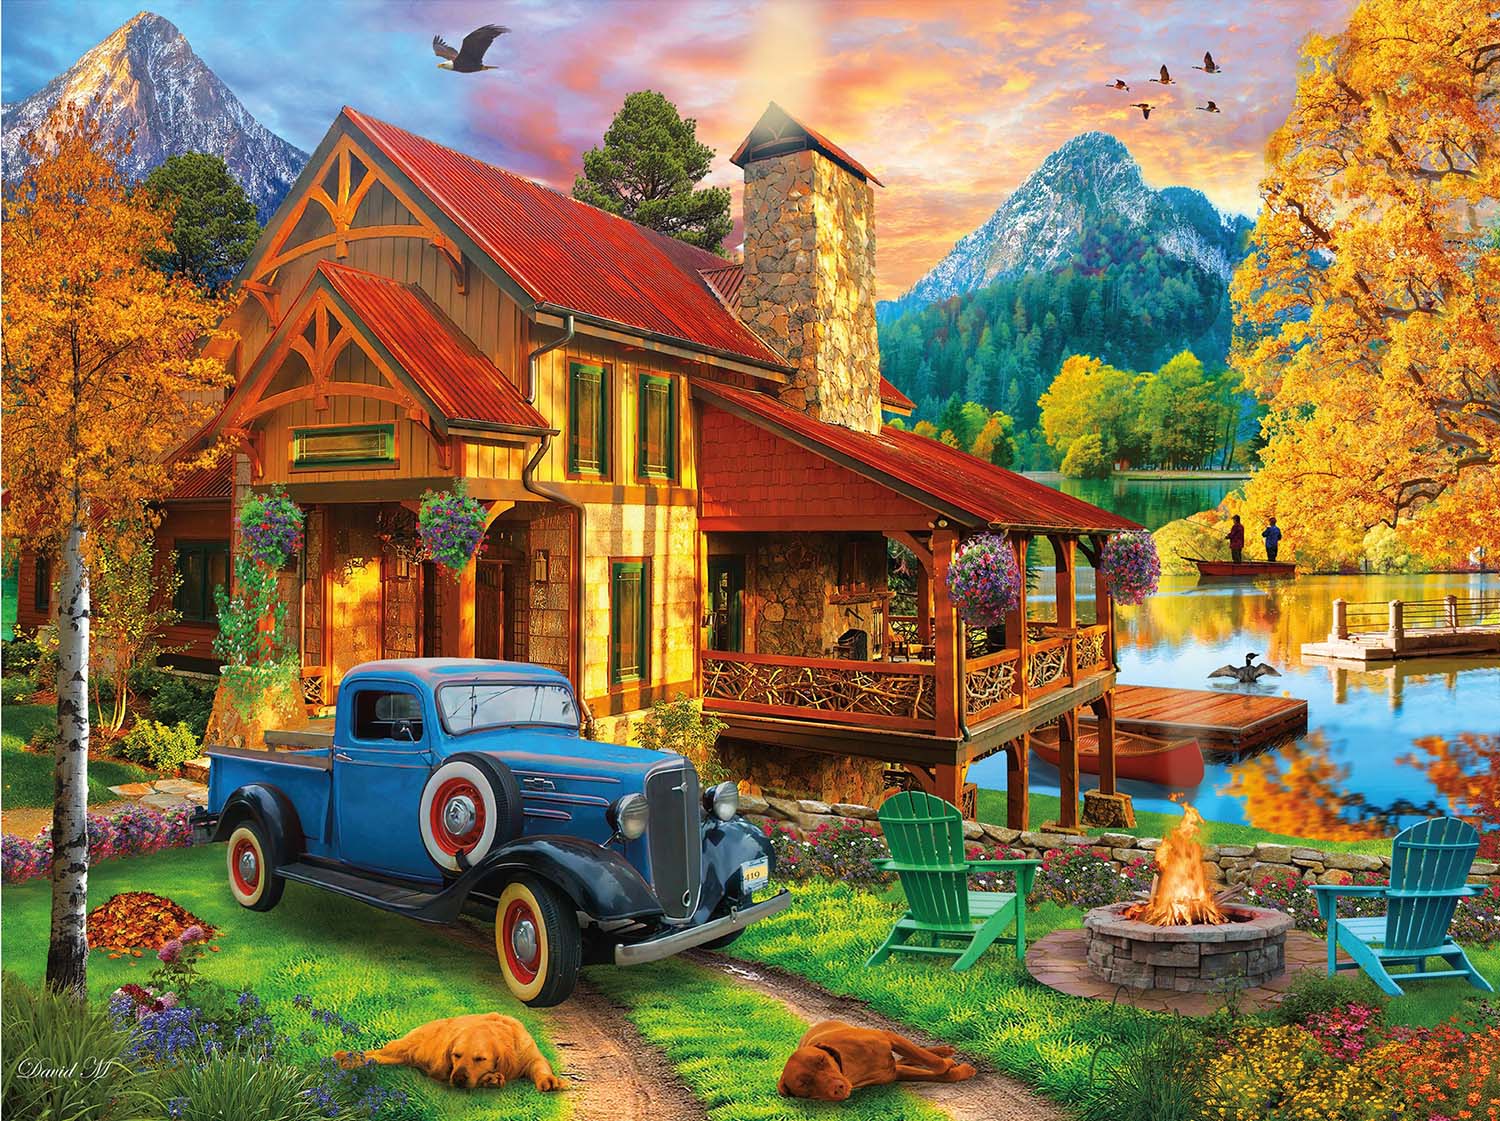 The Getaway Landscape Jigsaw Puzzle